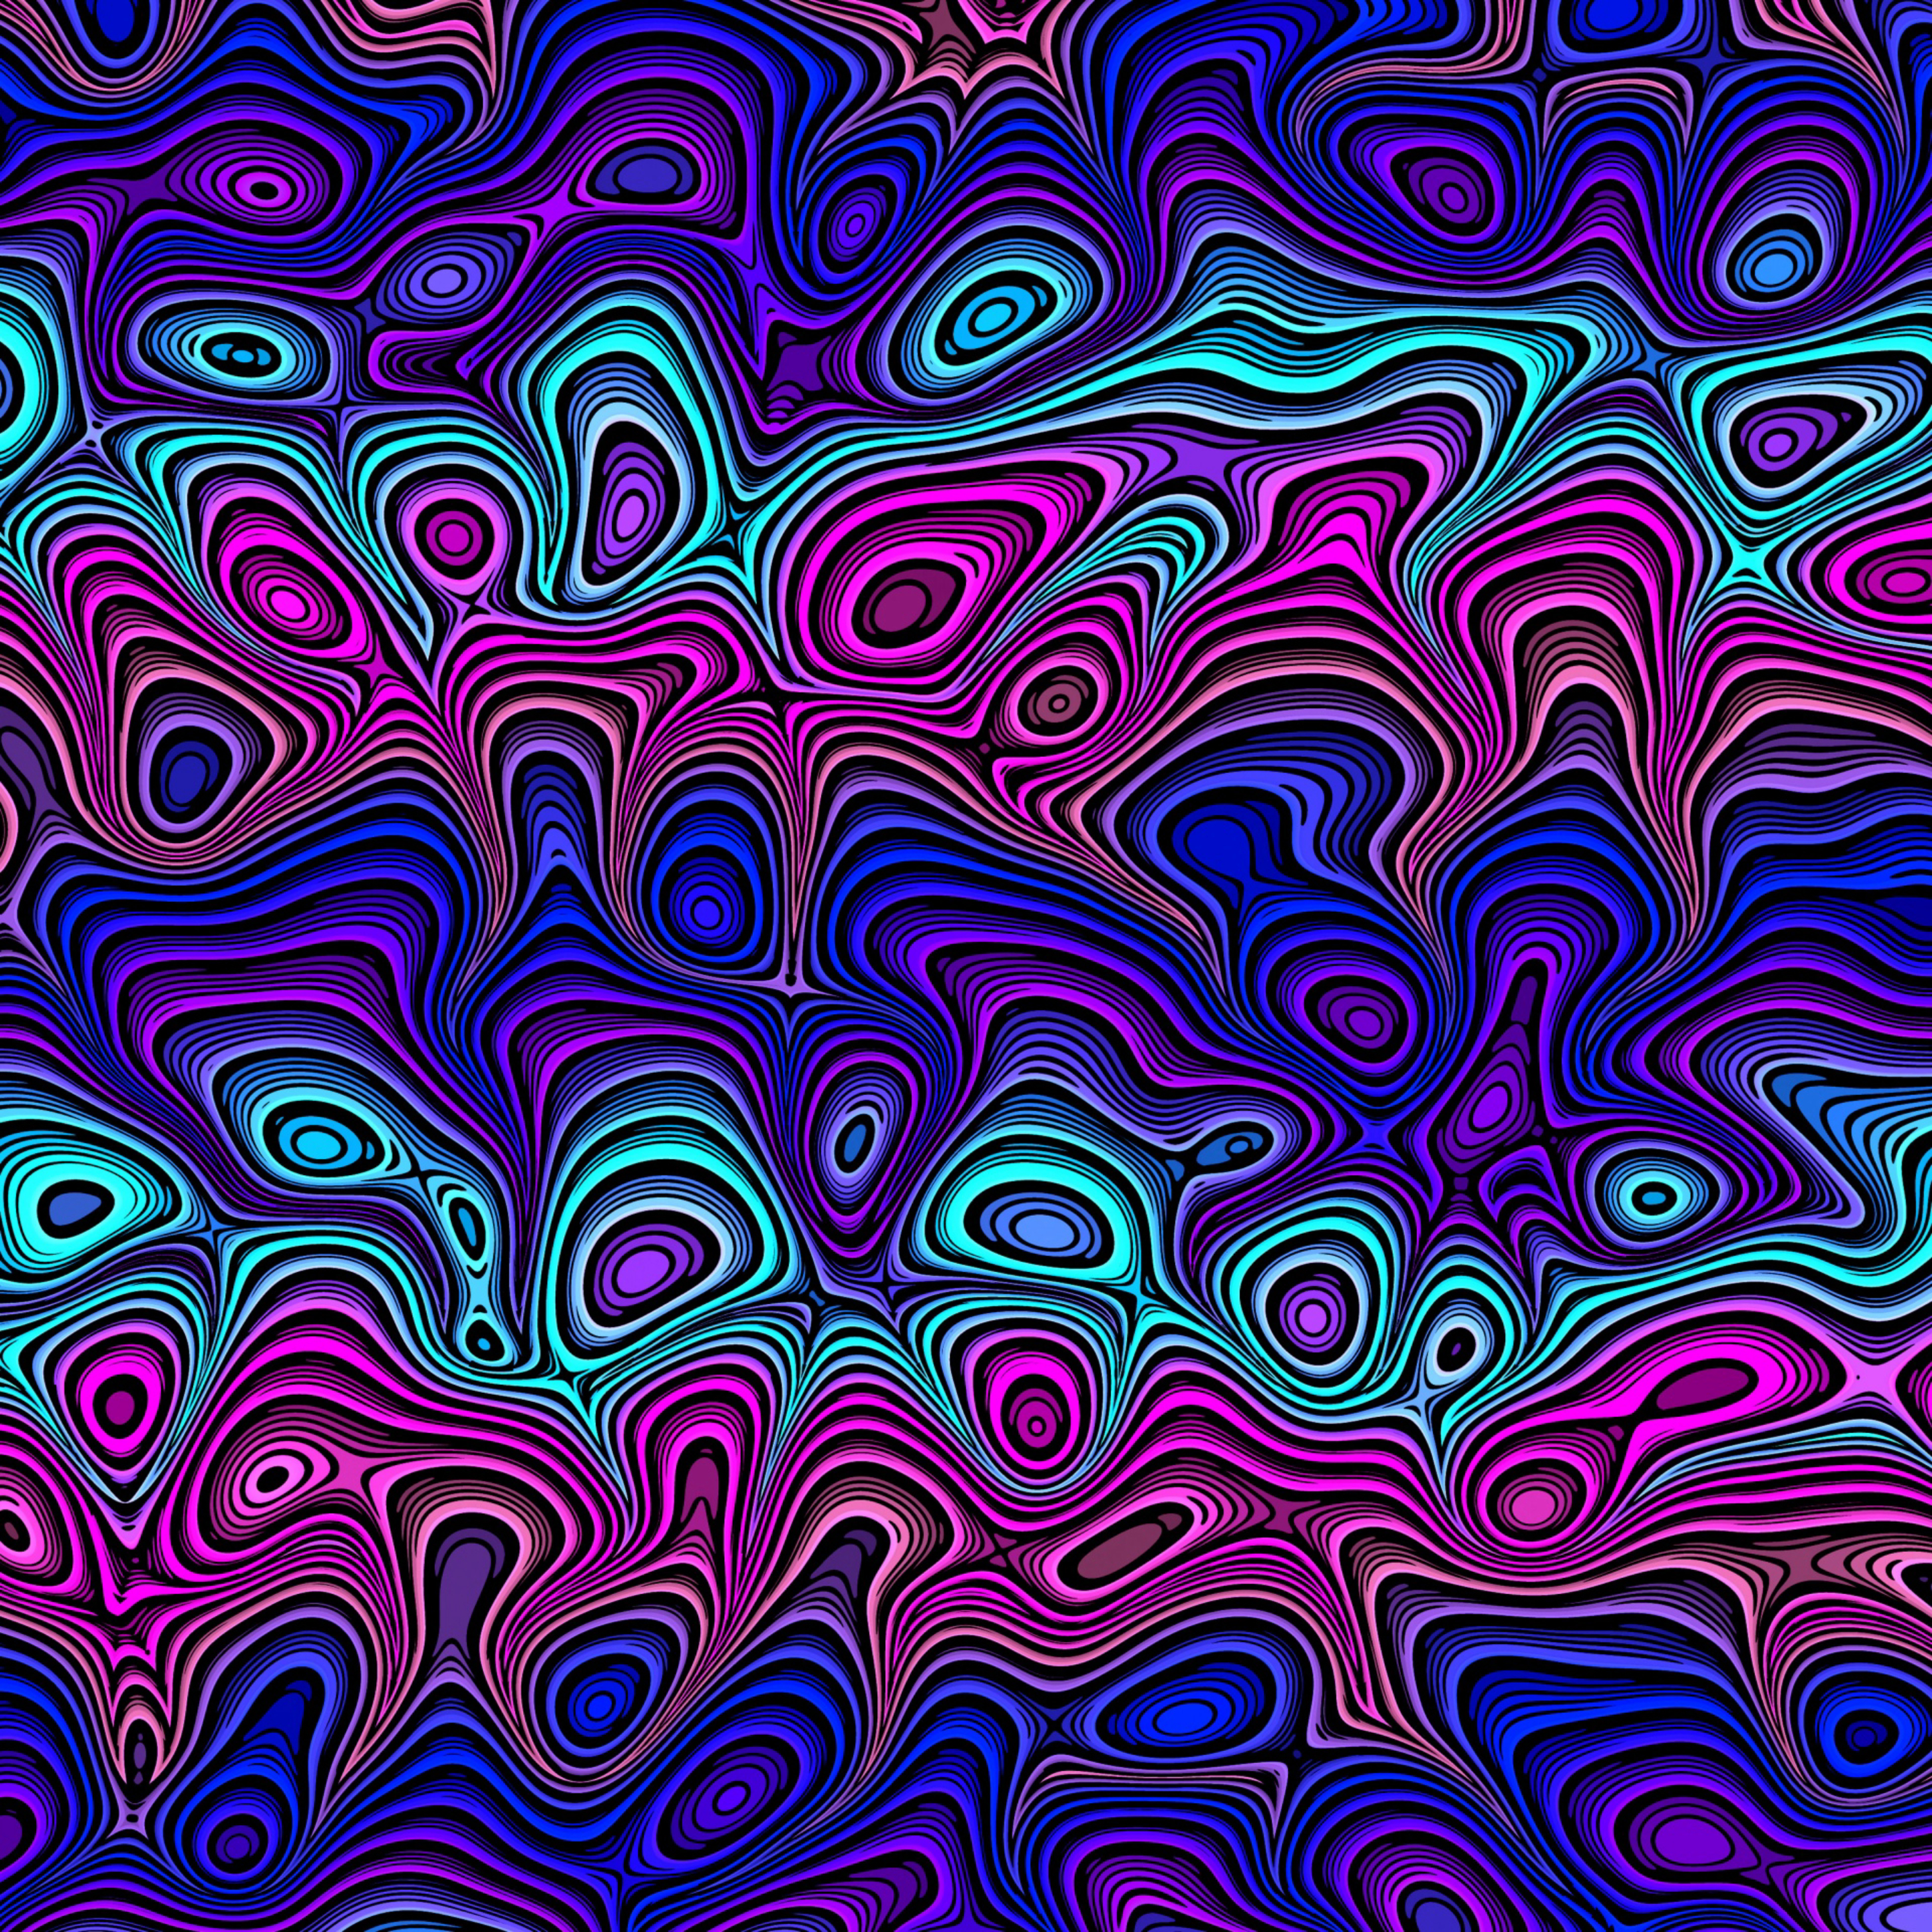 motley, multicolored, abstract, lines, wavy, swirling, involute QHD